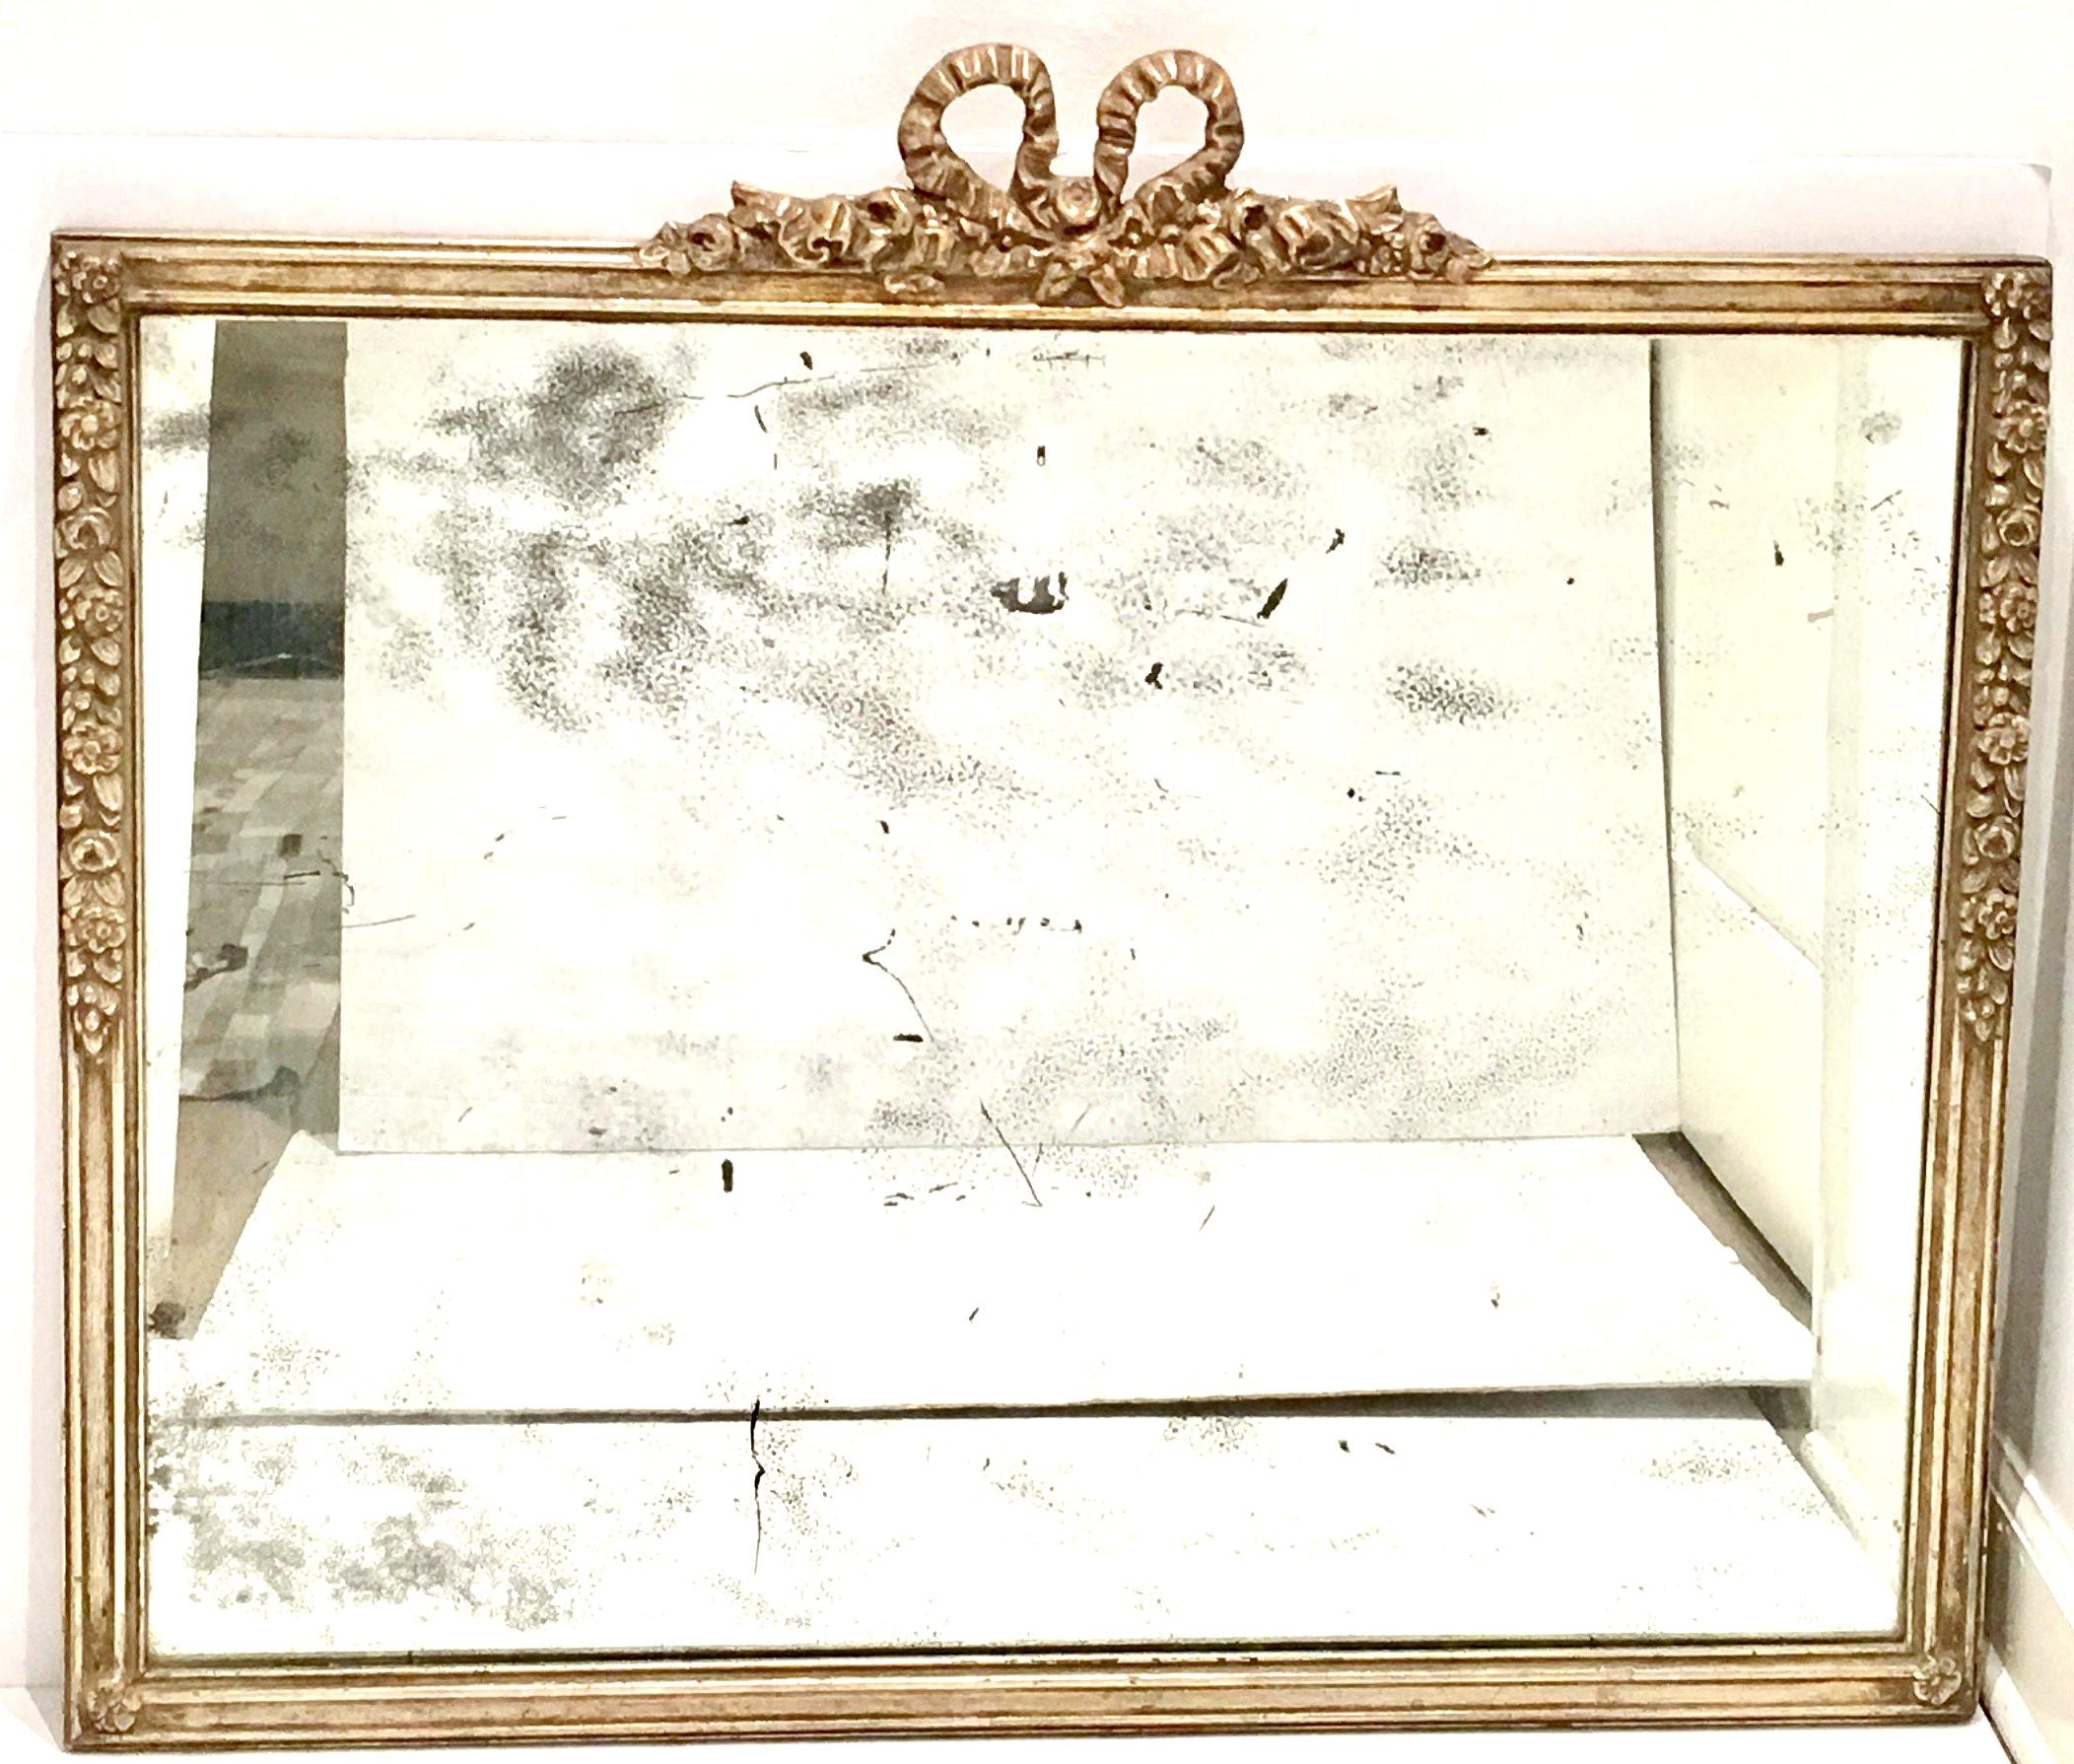 Large silver leaf carved Louis XVI style 19th century framed antique mirror. Original heavy mirror with coveted wear and patina. Carved high relief floral motif with a center crown in the French rope style.
  